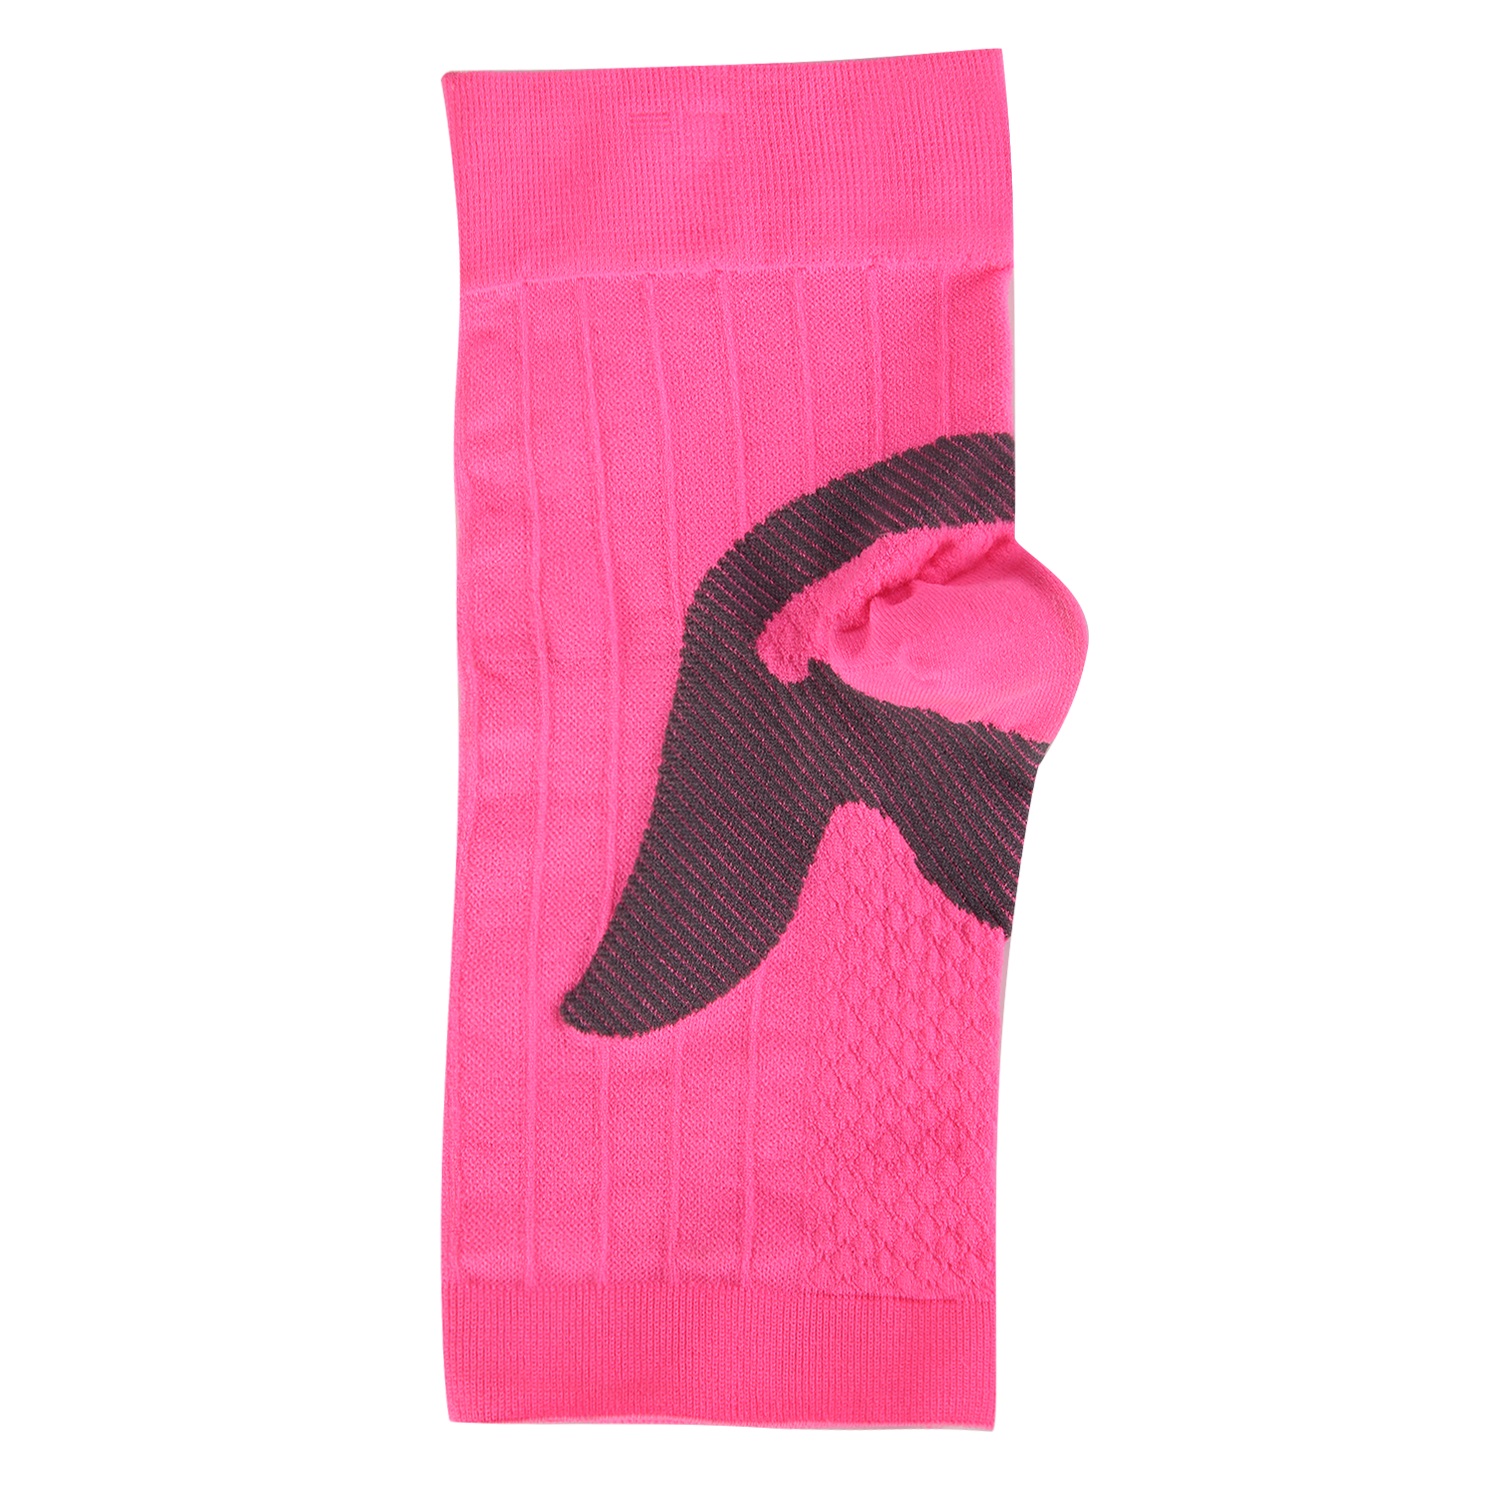 Wholesale Factory Price Anti Fatigue Customize Socks Ankle Support Sleeve Fasciitis Compression Ankle Brace